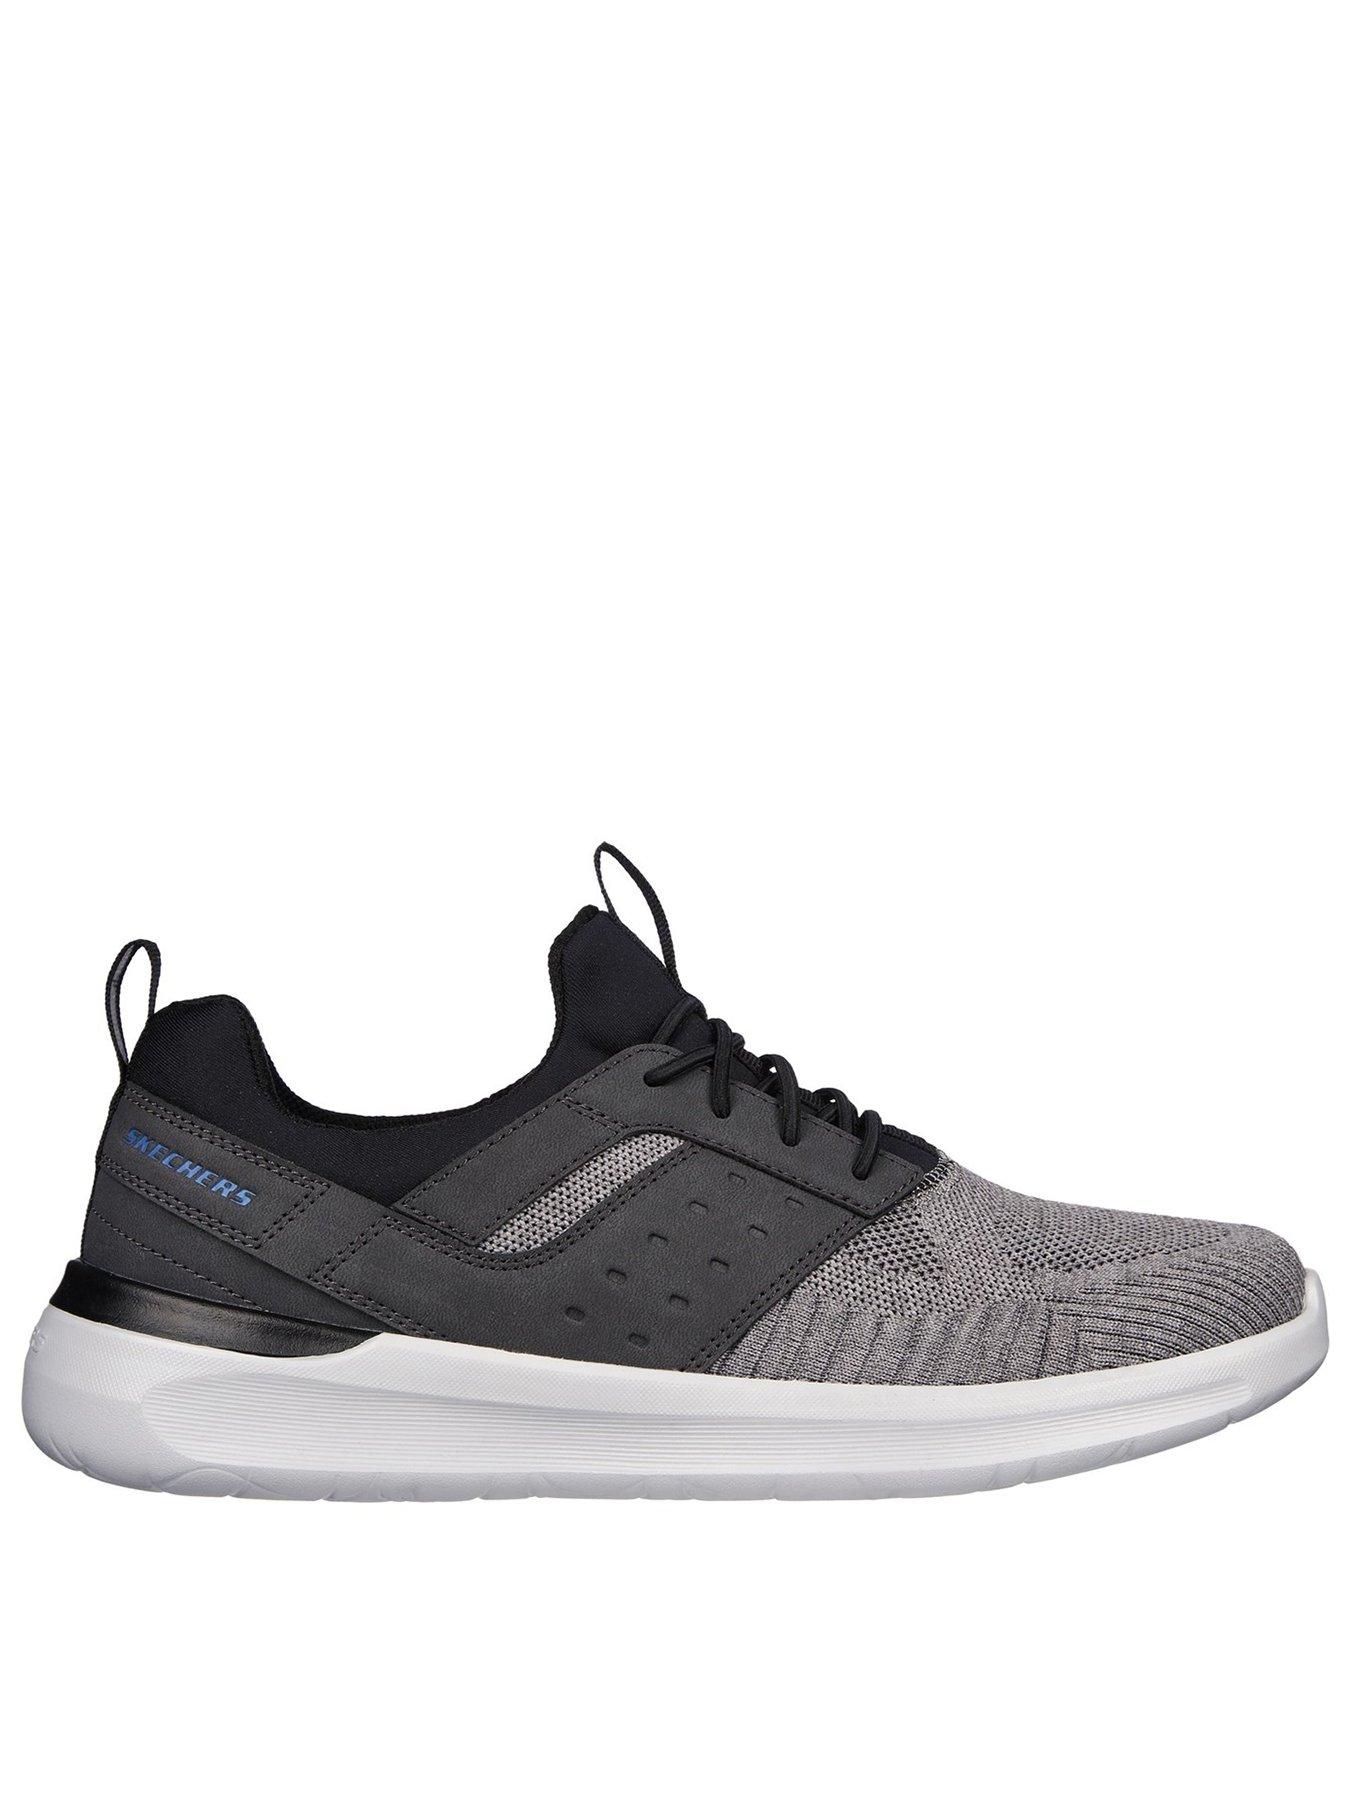 Skechers Air-cooled Goga Mat Arch Trainer - Grey | very.co.uk